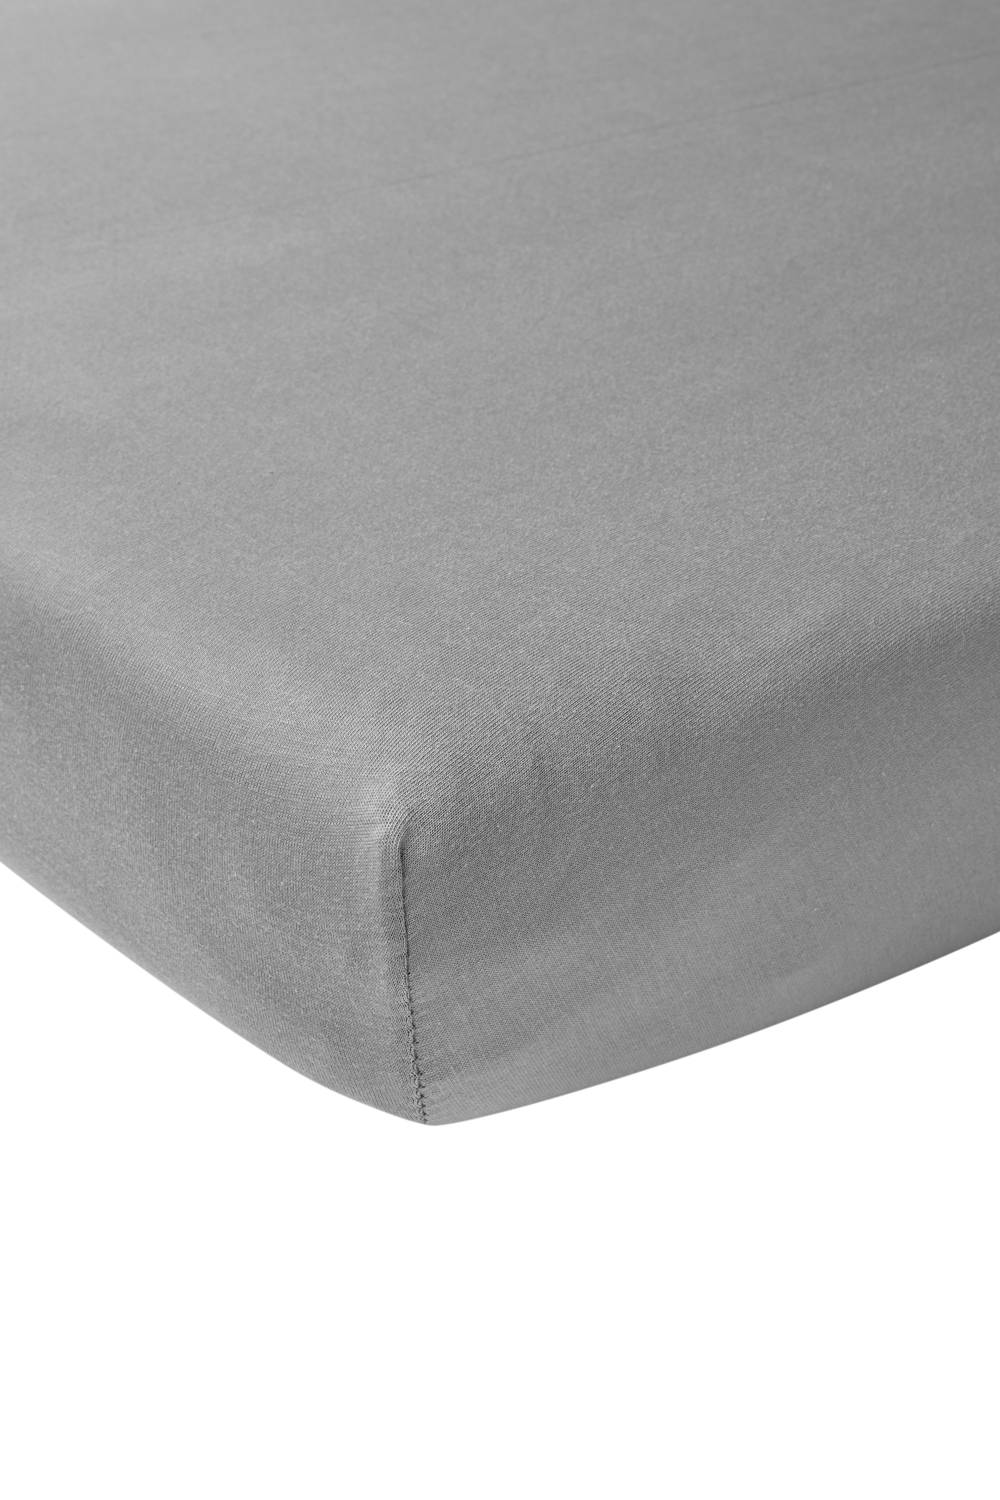 Fitted sheet cot bed Uni - grey - 60x120cm